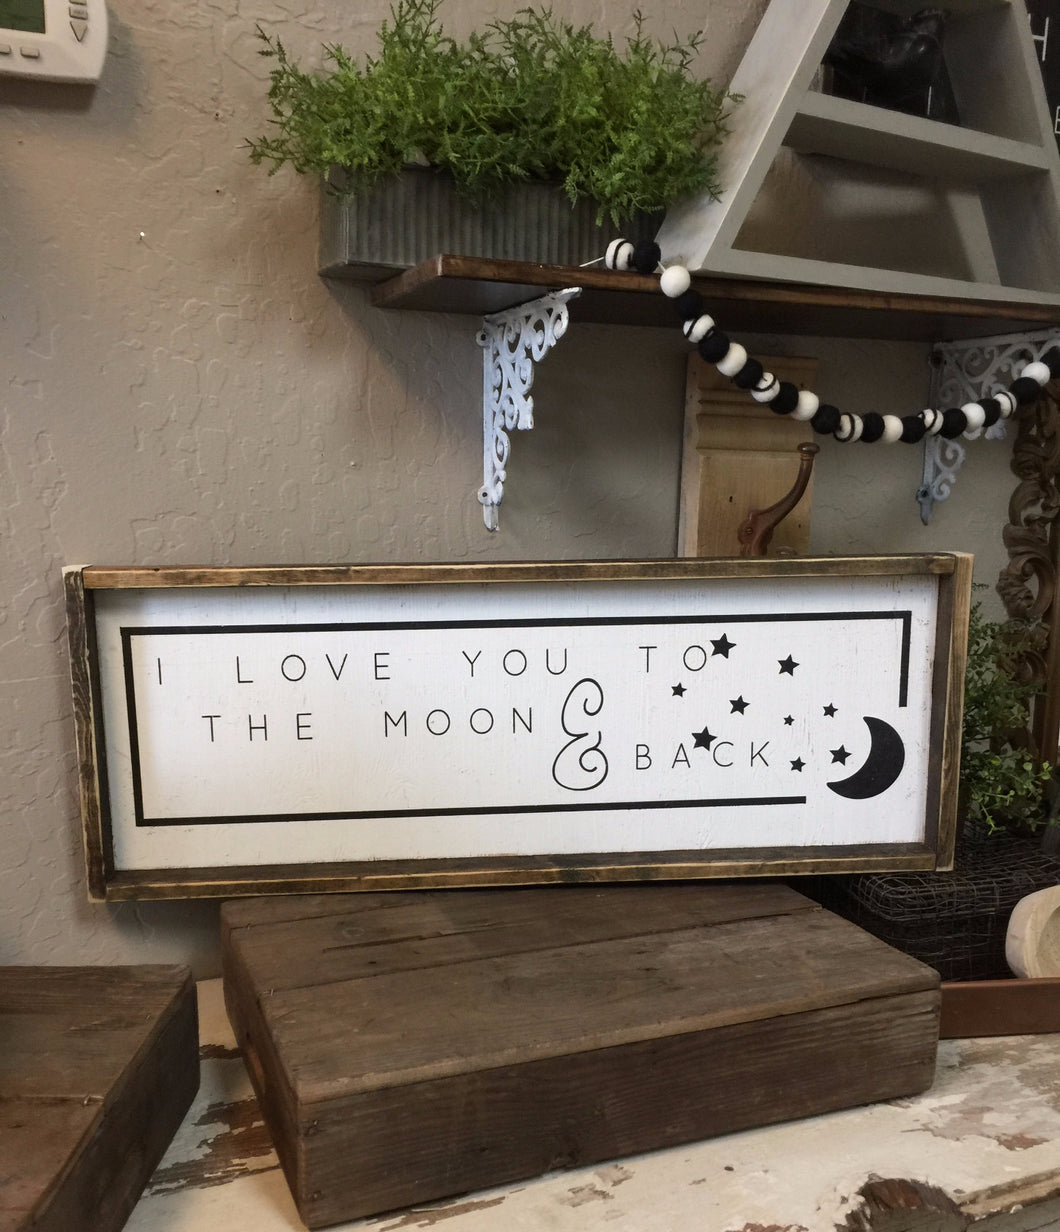 I Love You To The Moon with Stars